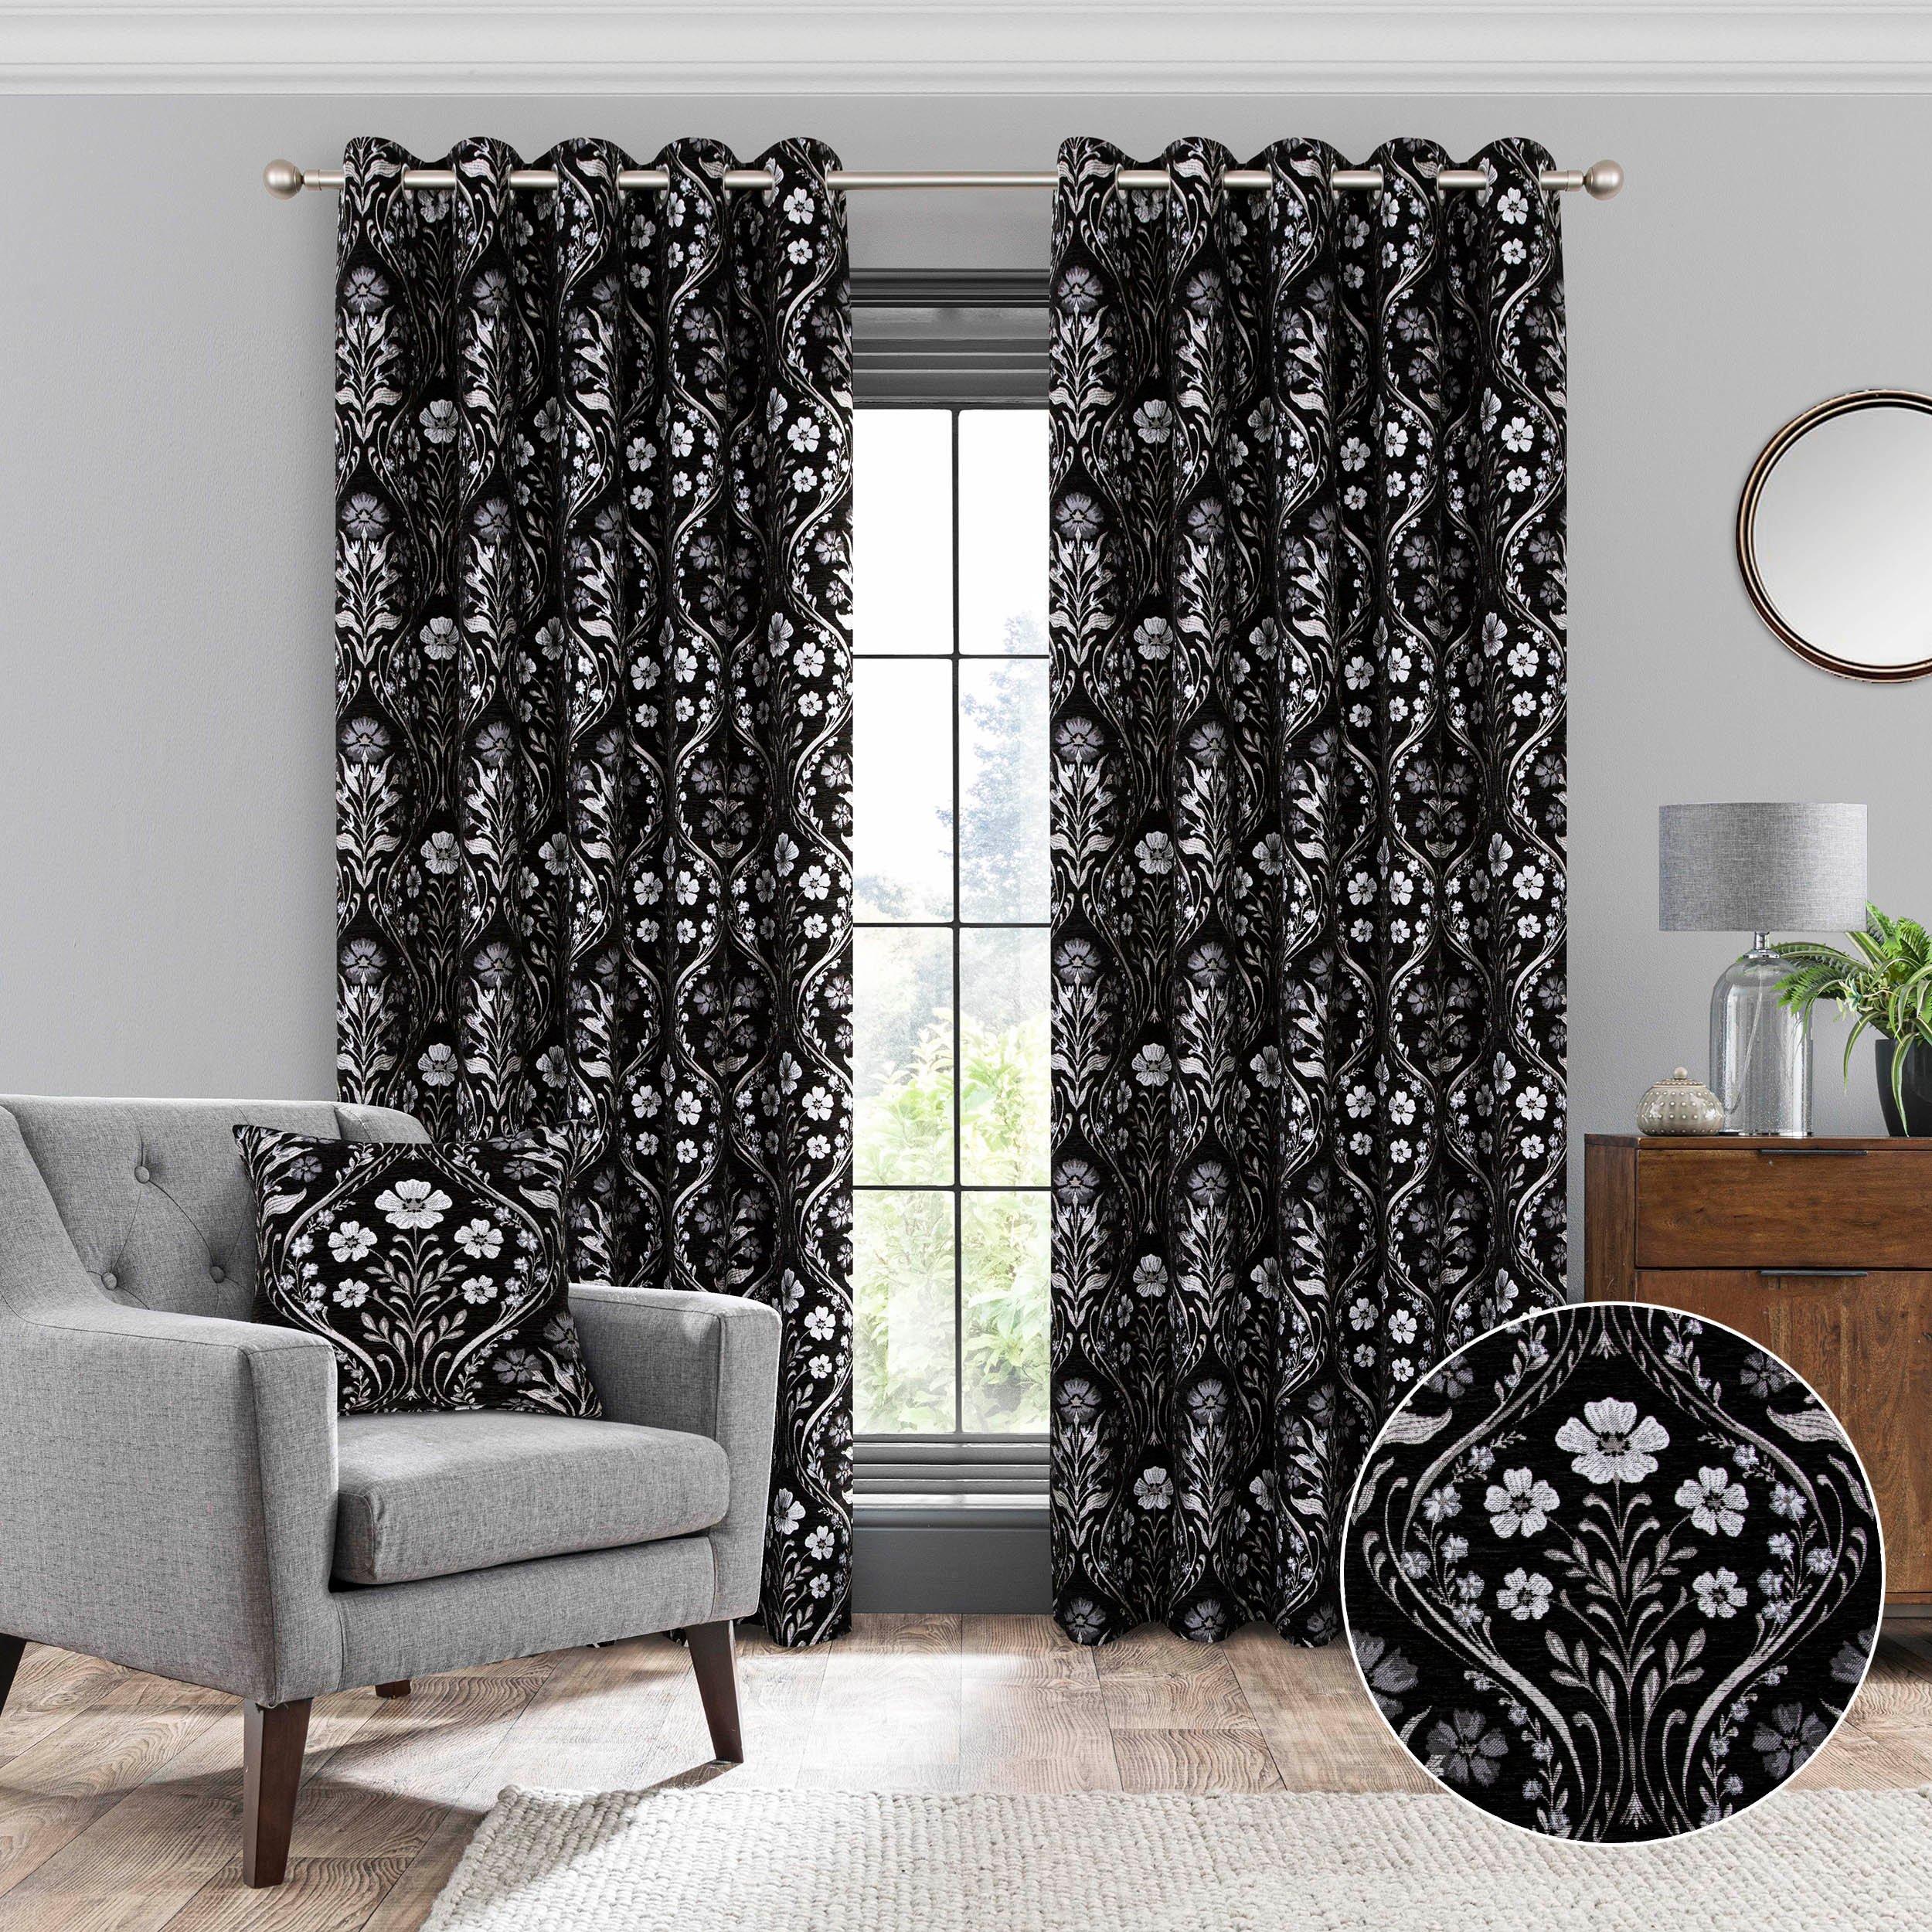 Luna Metallic Chenille Fully Lined Eyelet Curtains pair